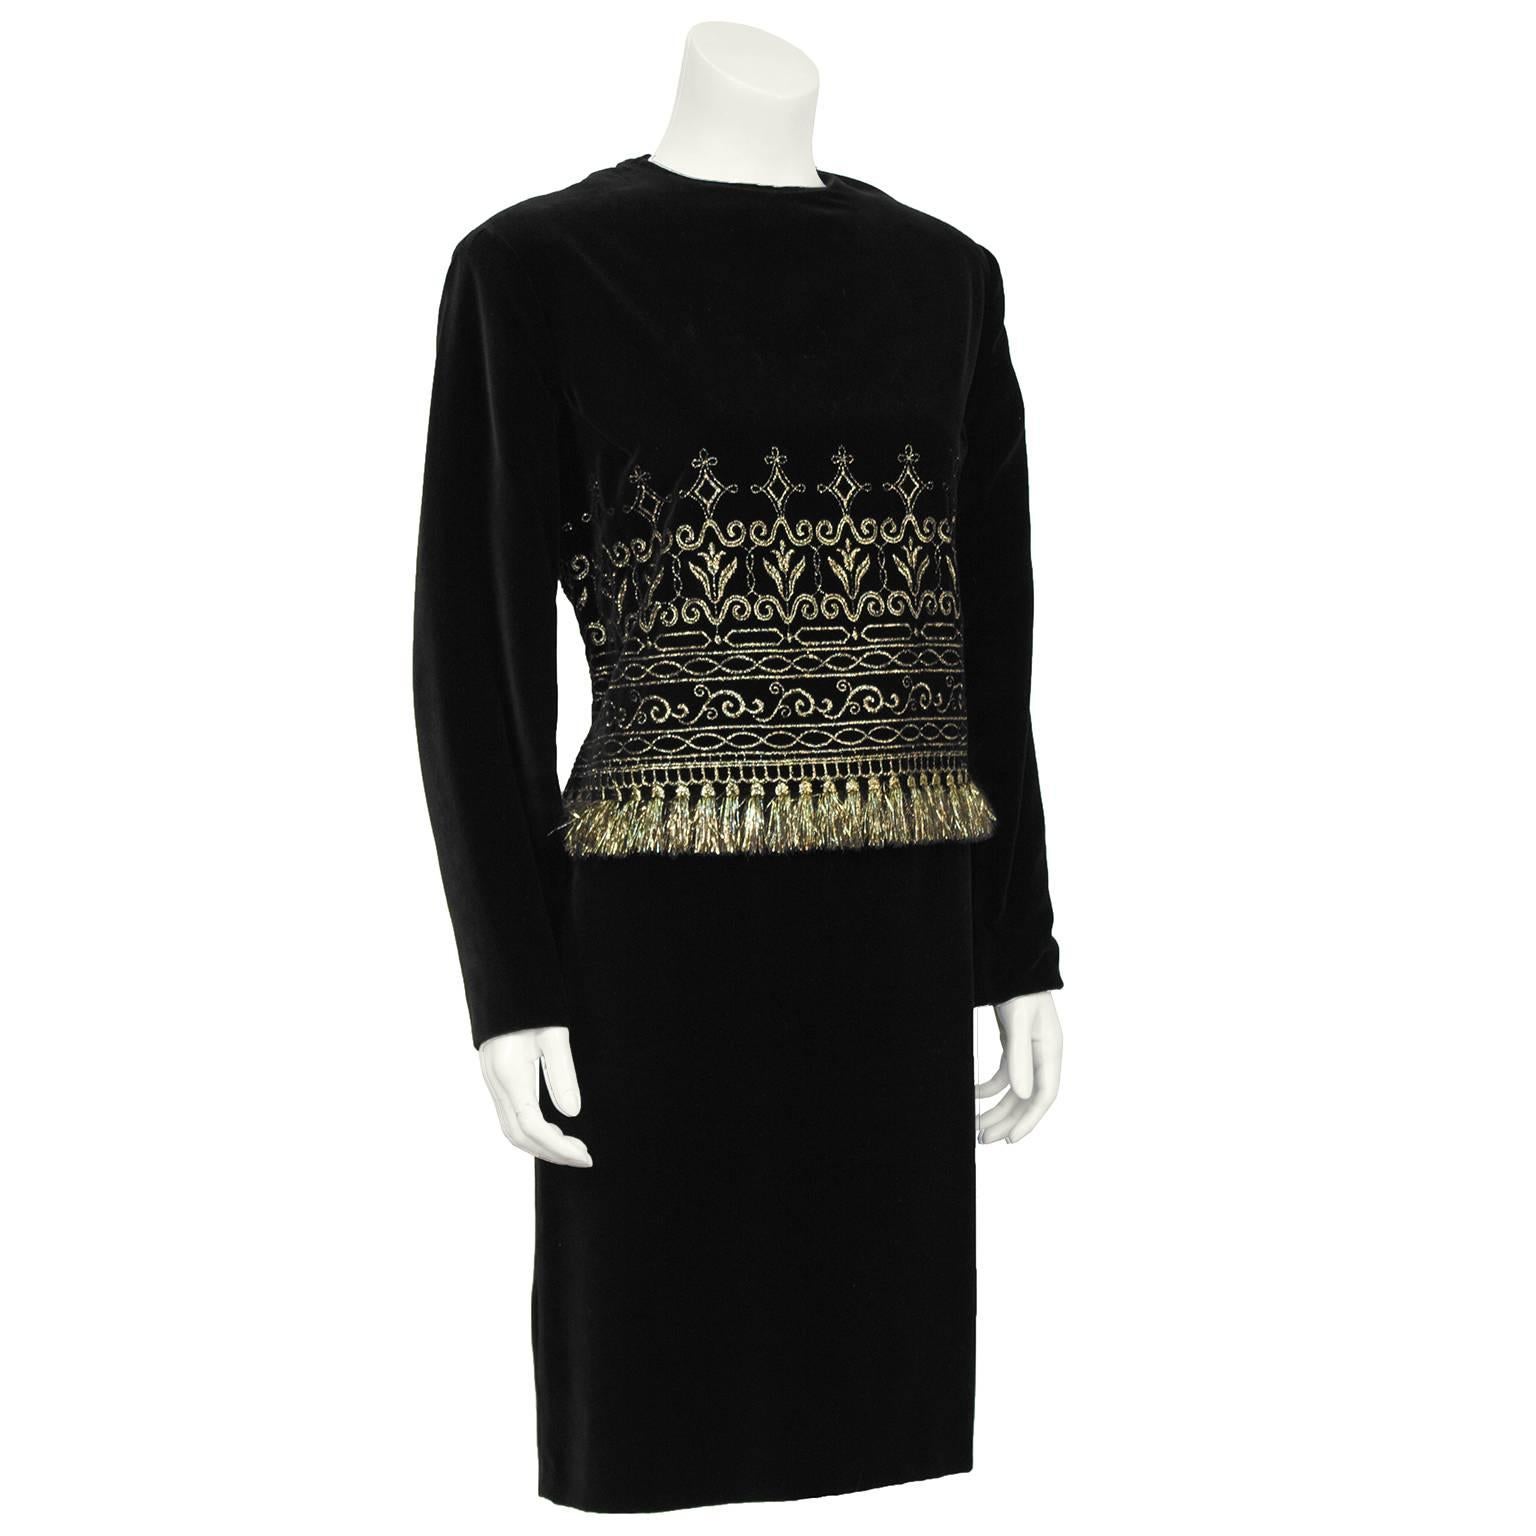 Black velvet Zandra Rhodes cocktail dress from the 1980's. The long sleeve, high neck dress has an intricate gold thread embroidered mid section that finishes with a fringe along the waist. Falls to the mid thigh and zips up the back. In excellent